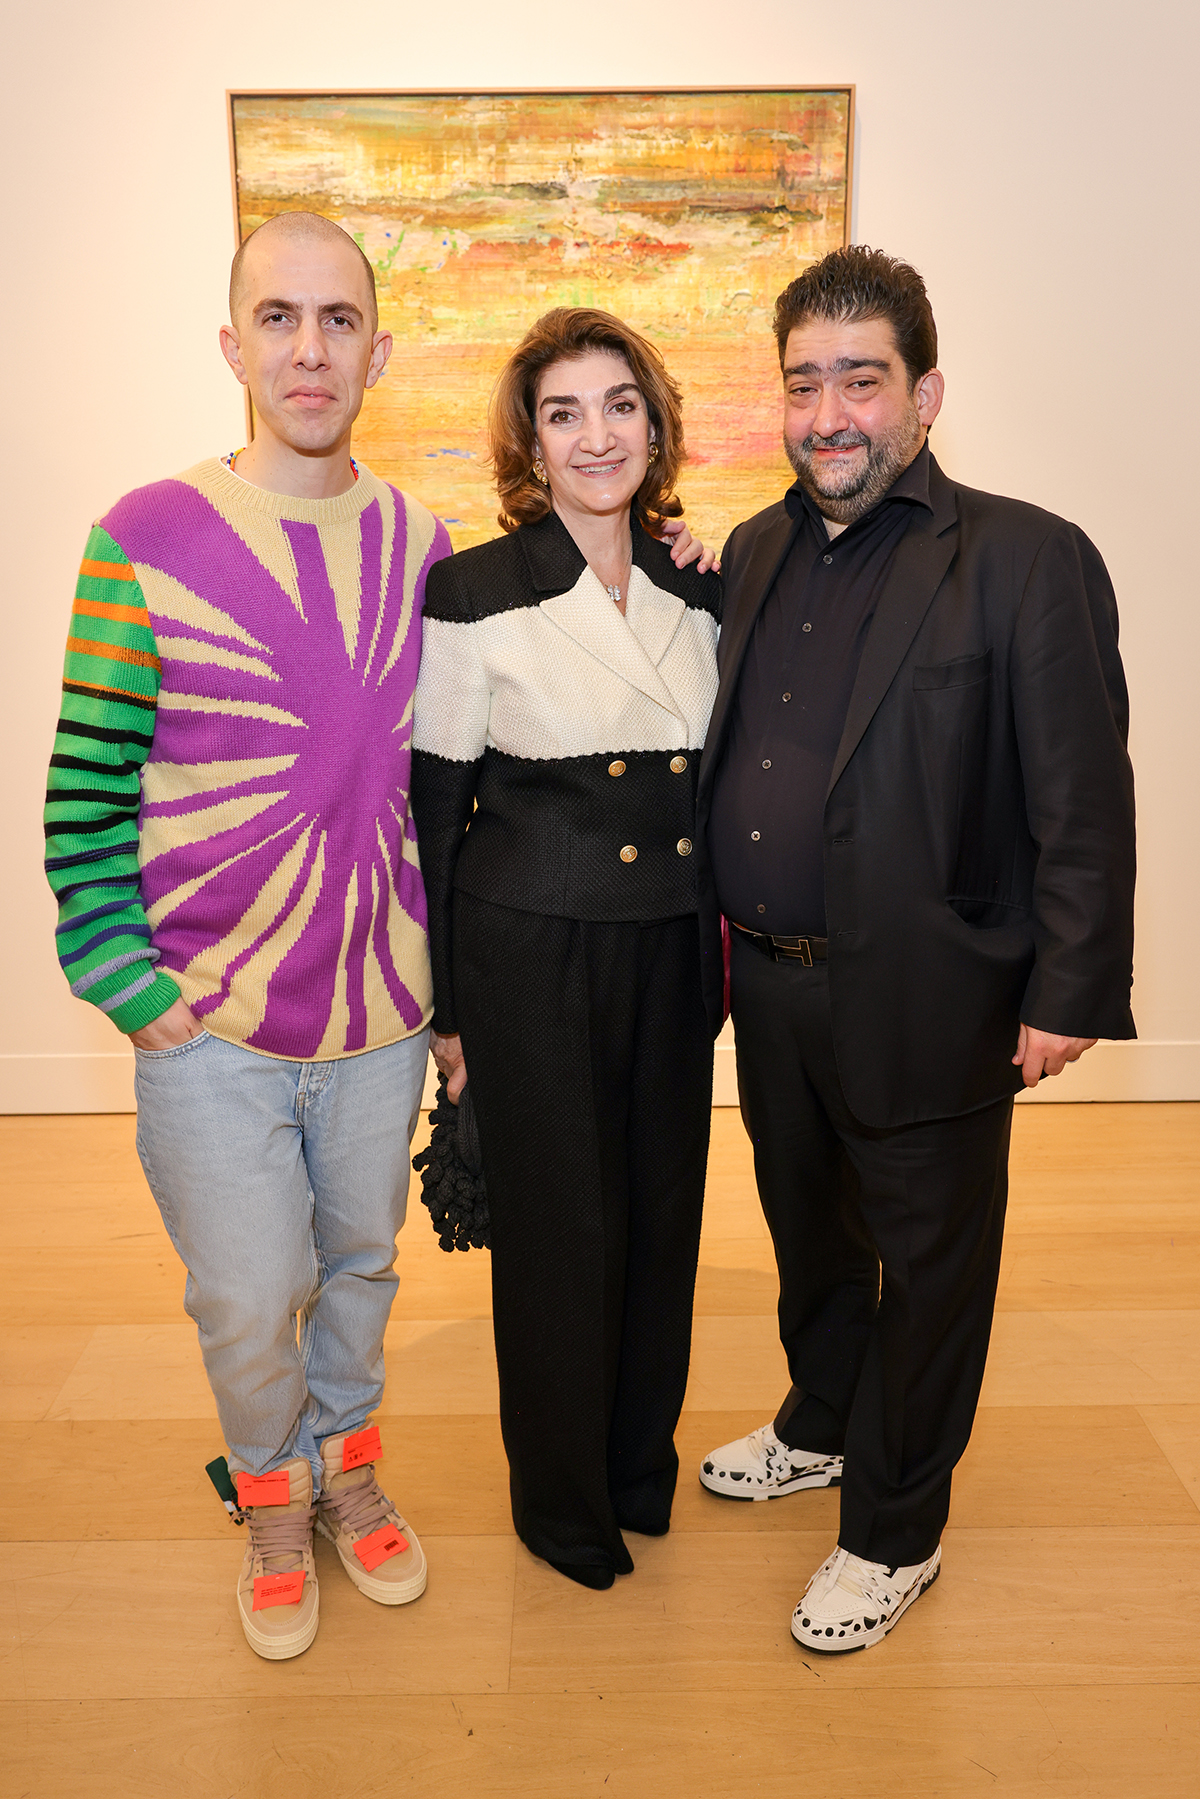 A woman in a black and white suit standing between a man in an all black suit and another man wearing a purple tie dye jumper, blue jeans and orange trainers